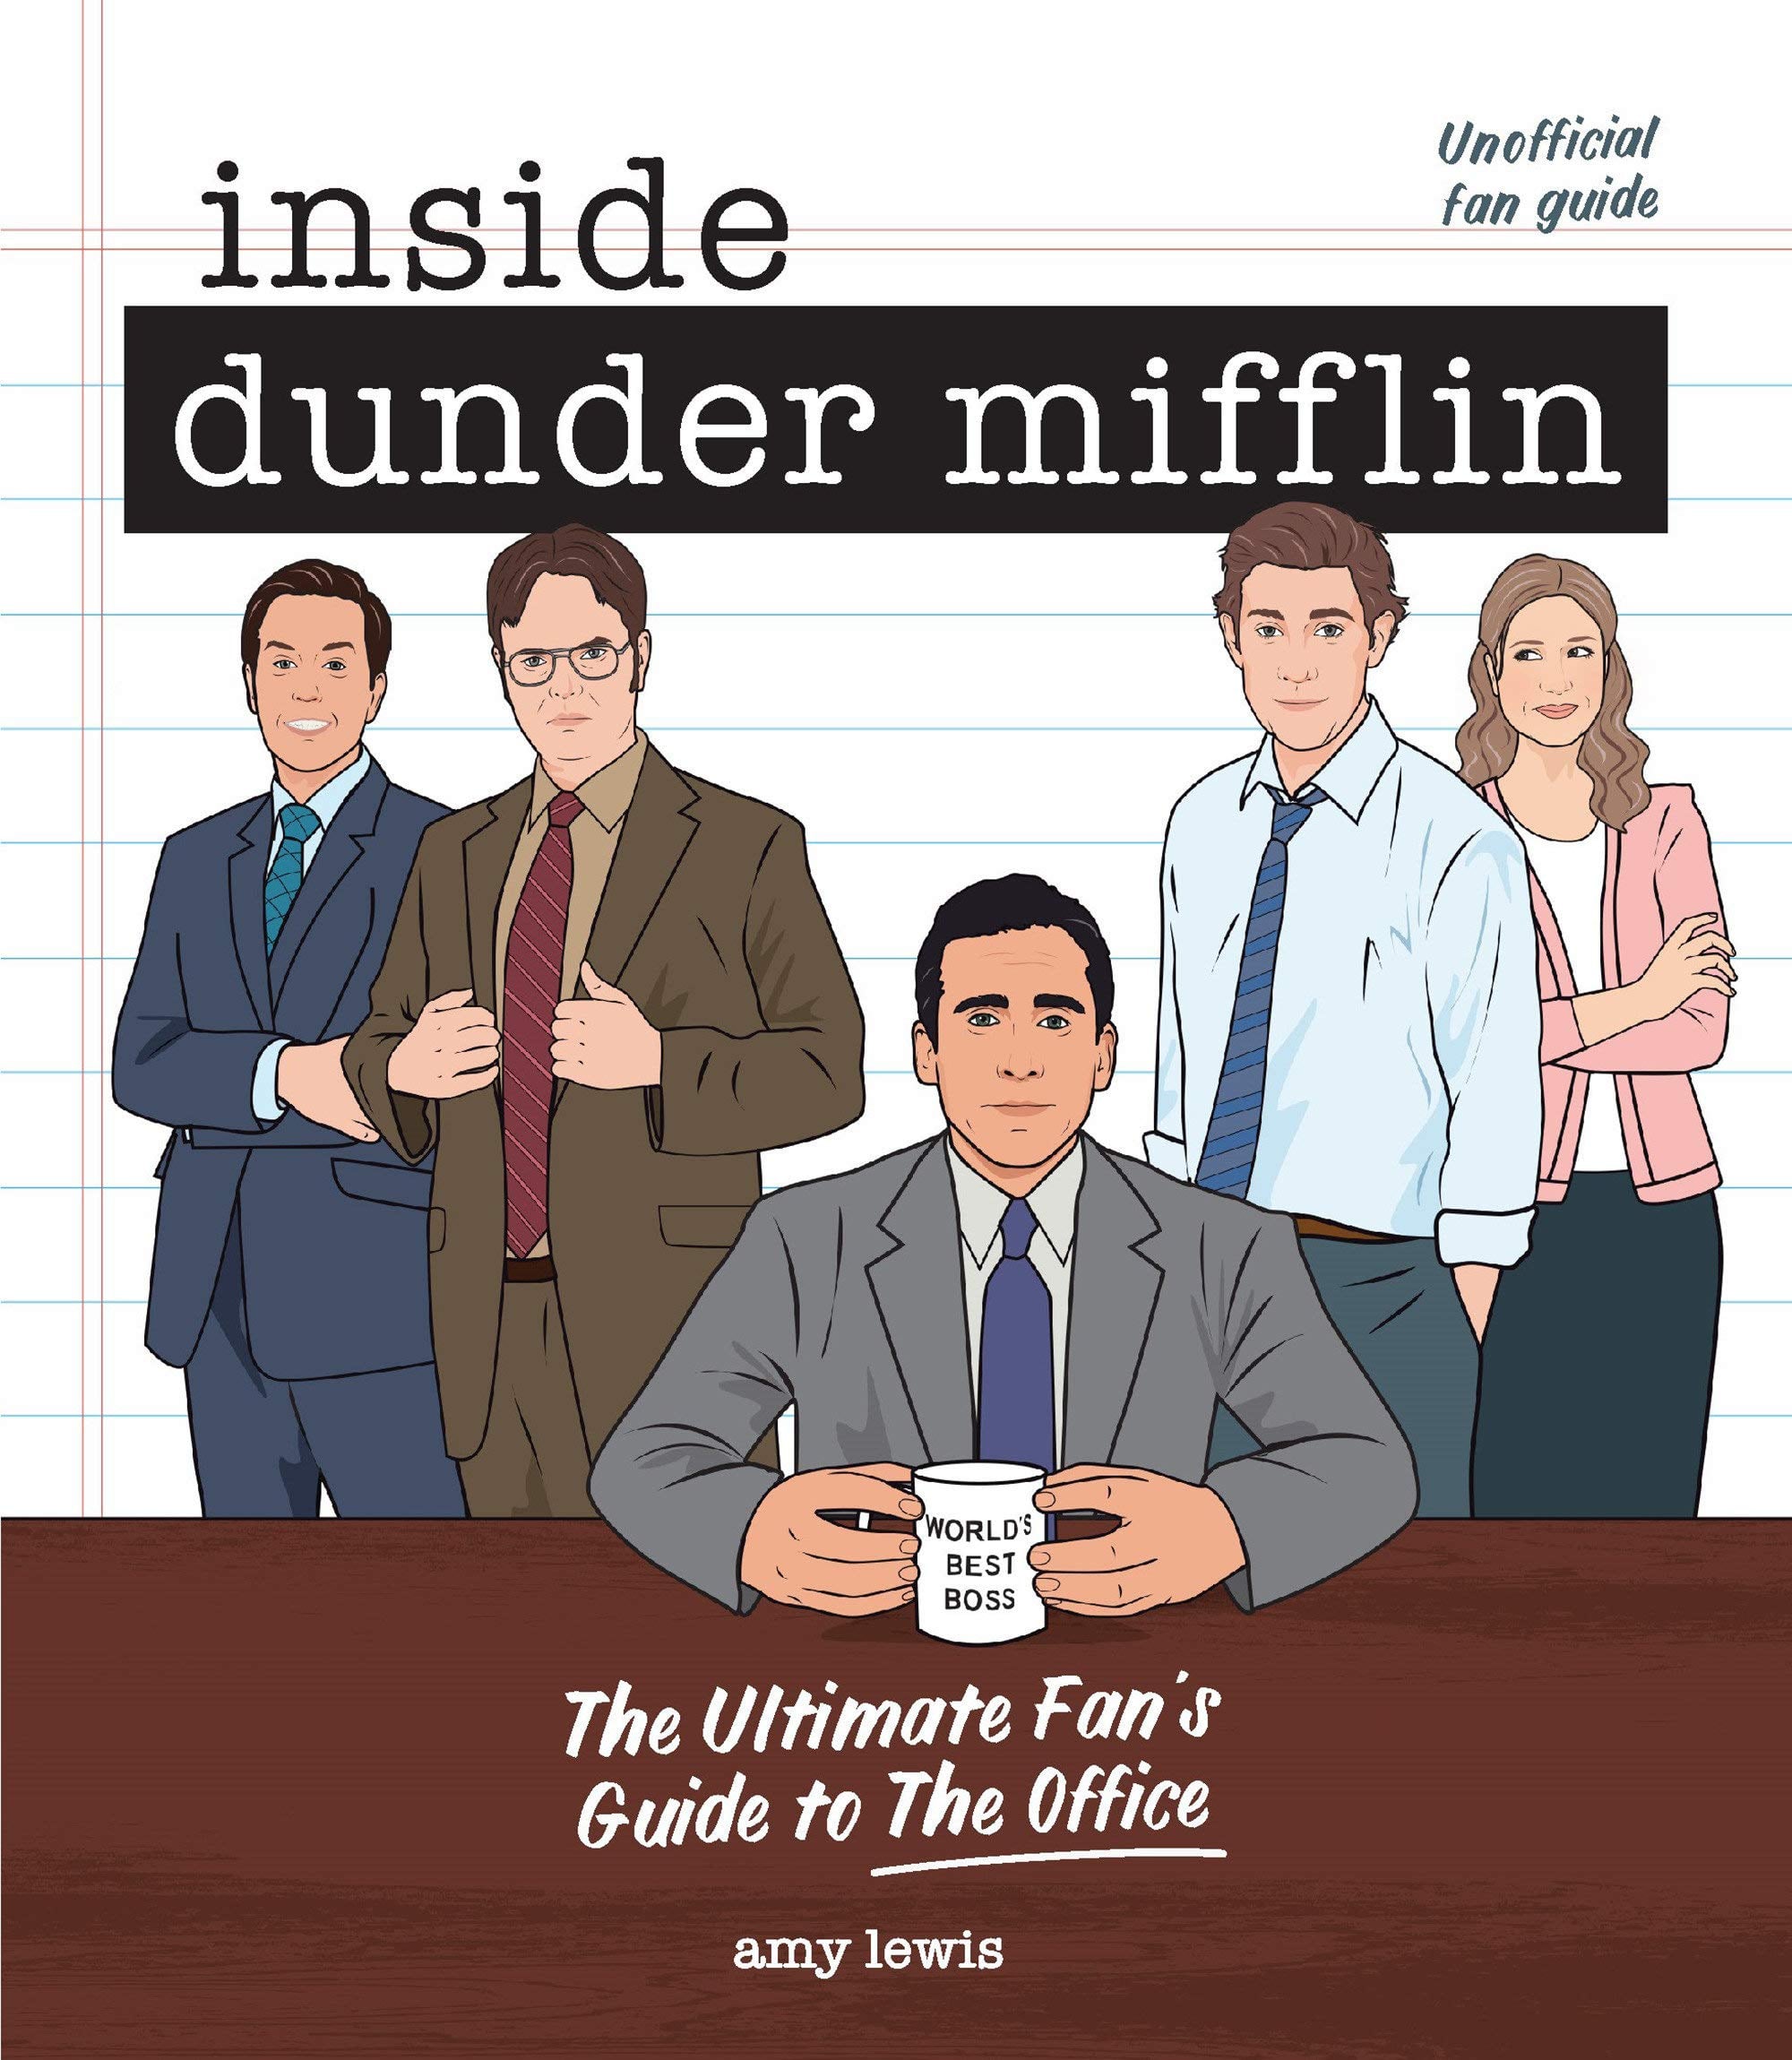 The Office' Gift Guide: Best Gift Ideas for Every Fan of the Show